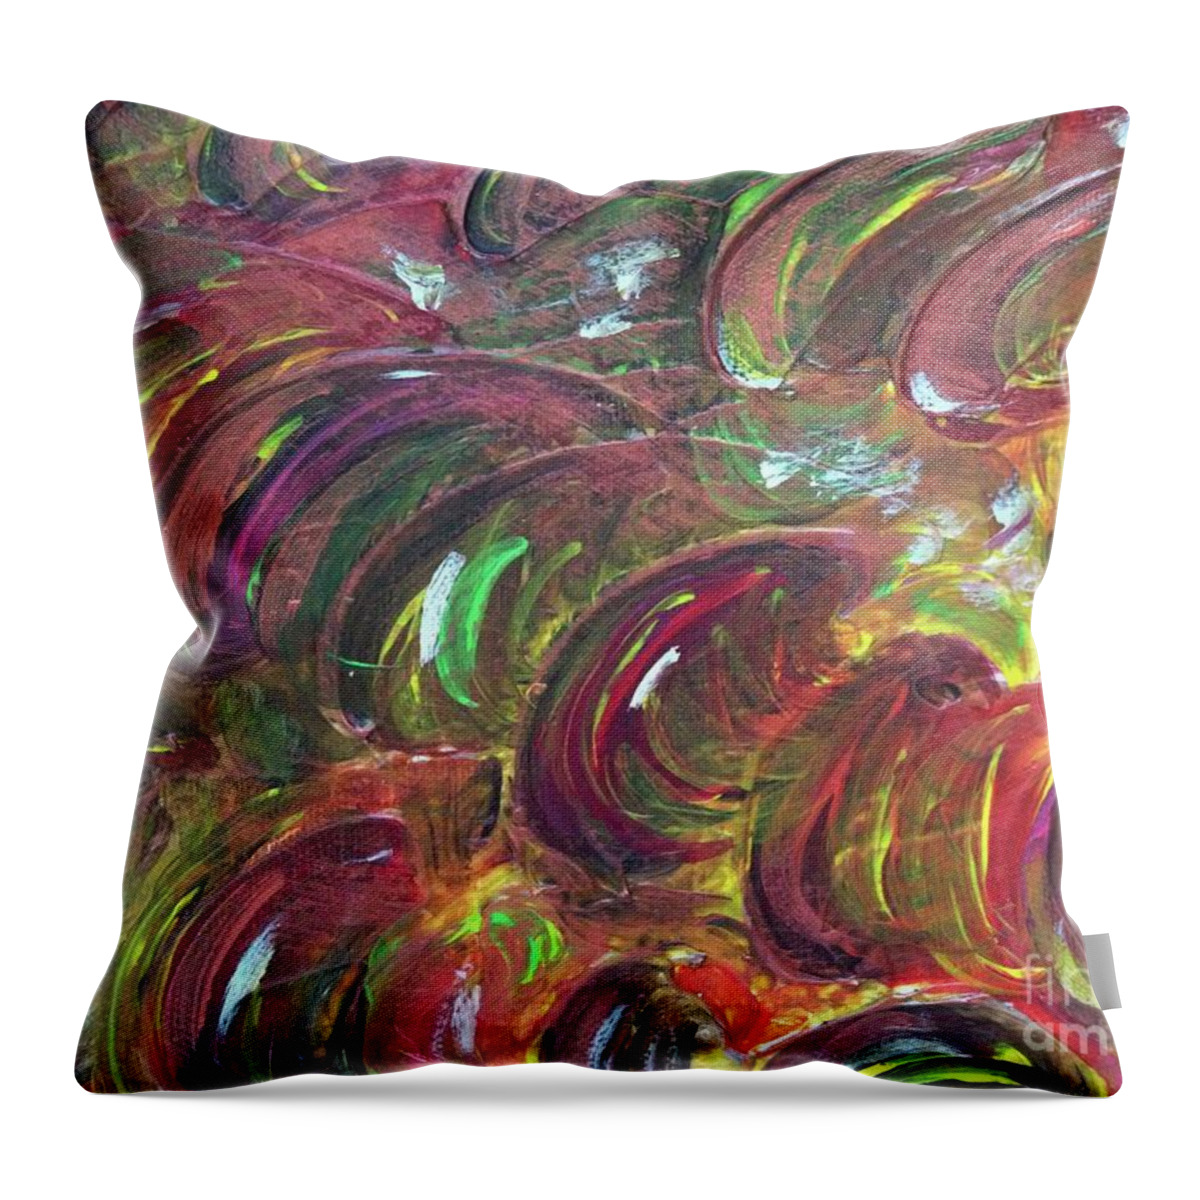 Snow In Autumn Throw Pillow featuring the painting Snow in Autumn by Sarahleah Hankes